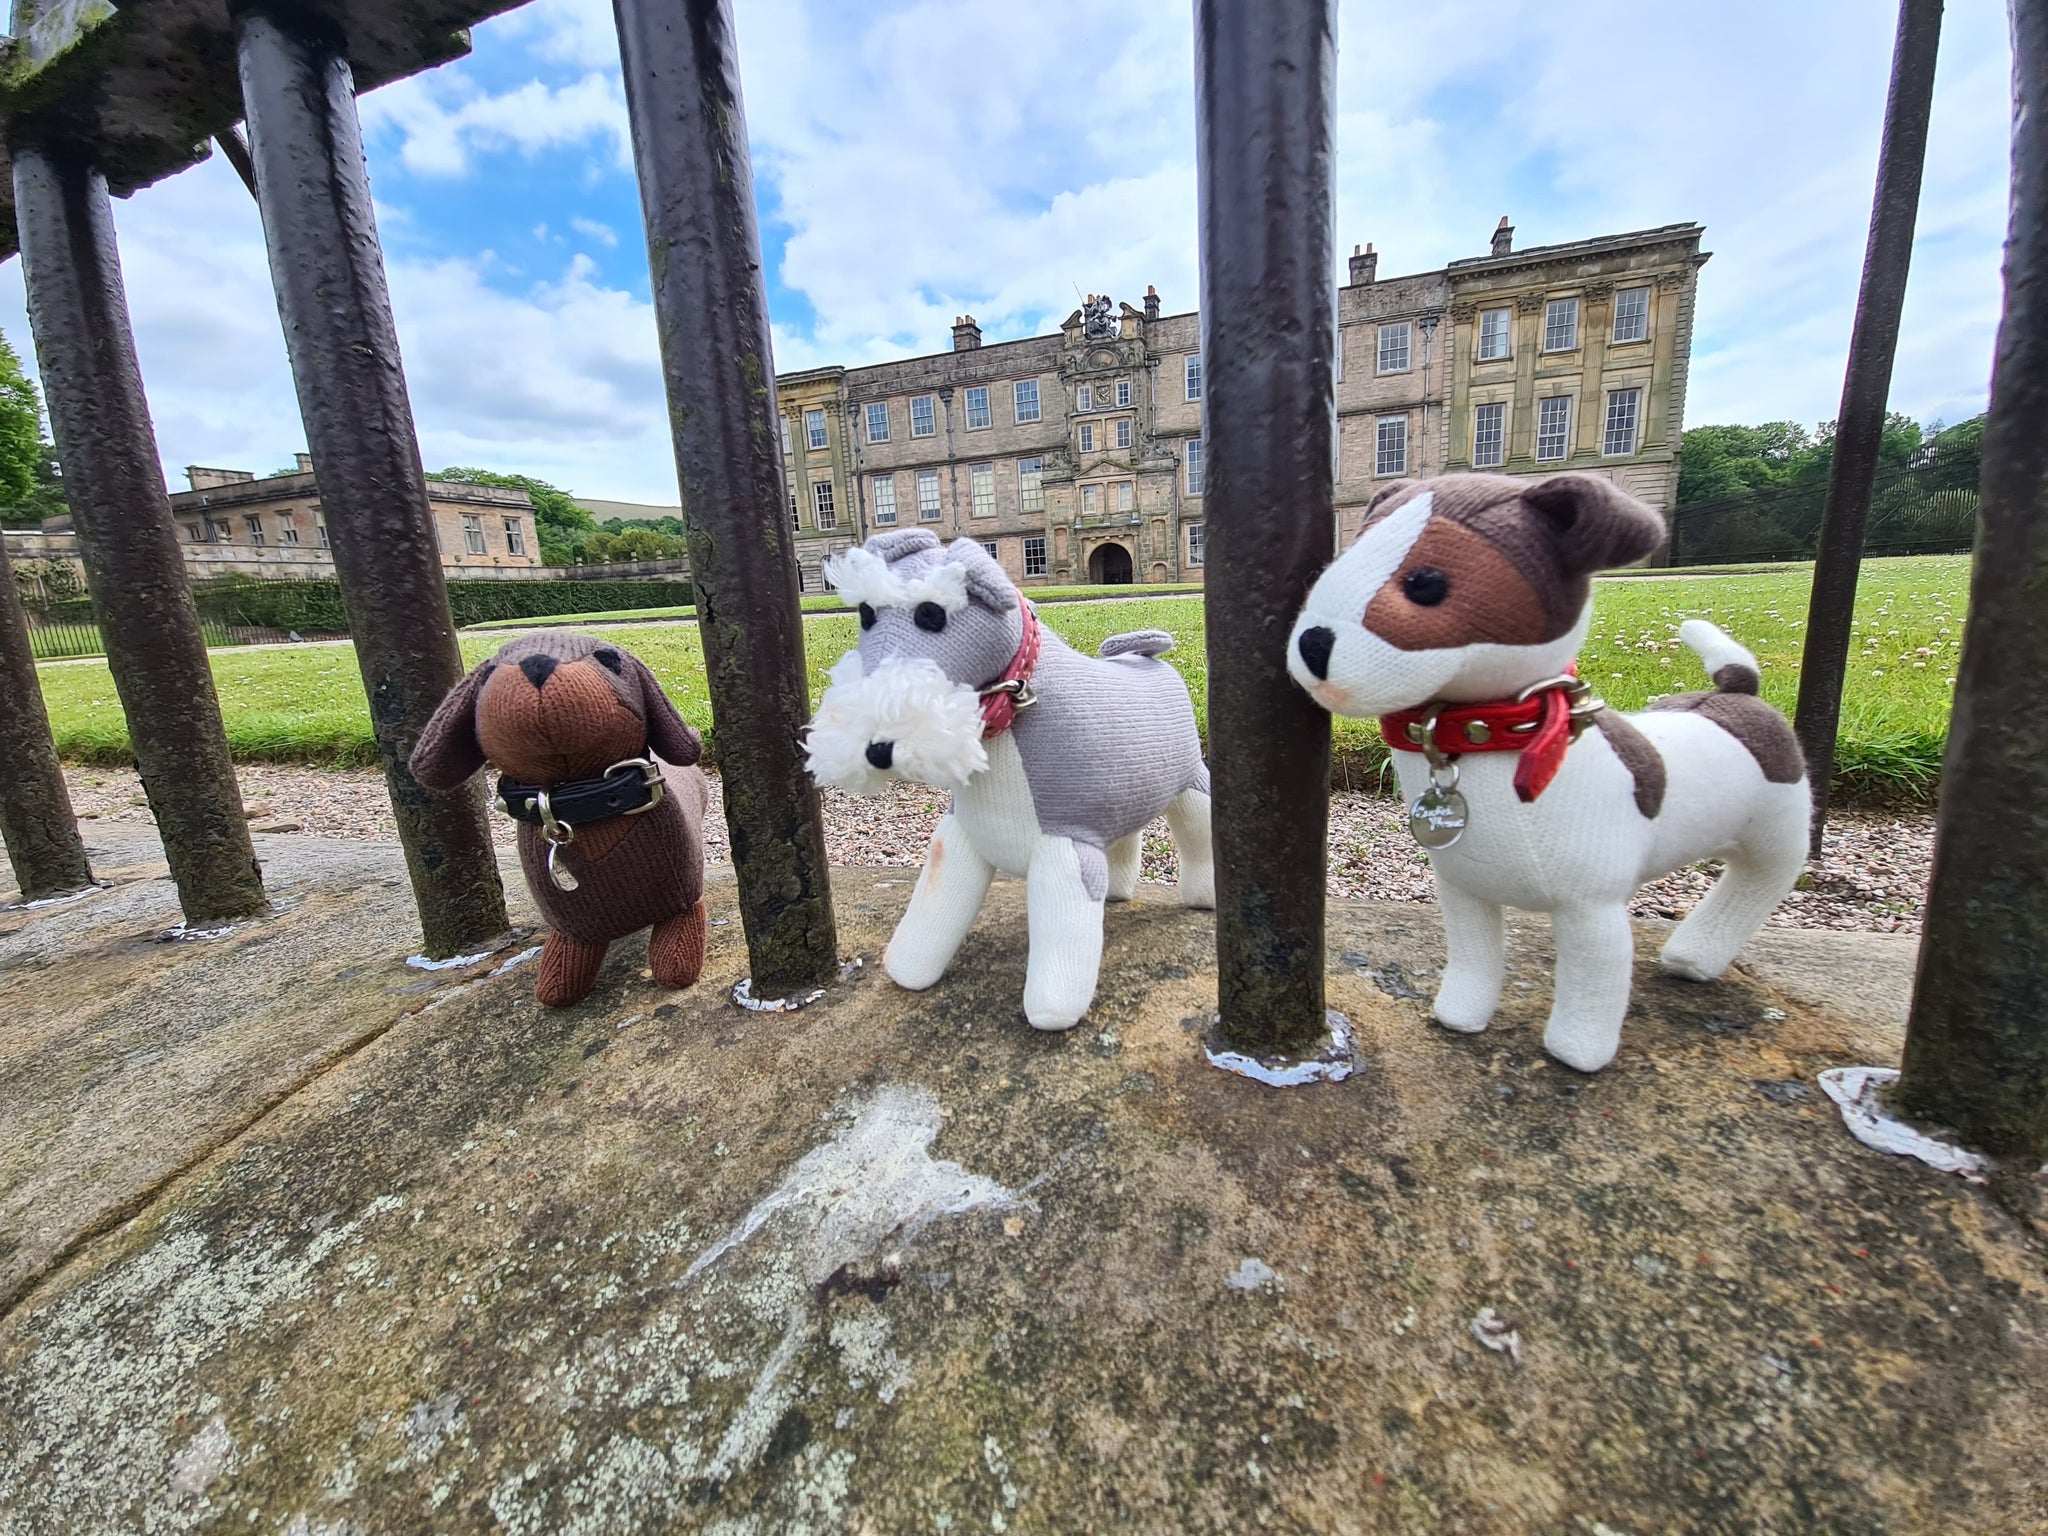 Fun In The Sun At Lyme Park!